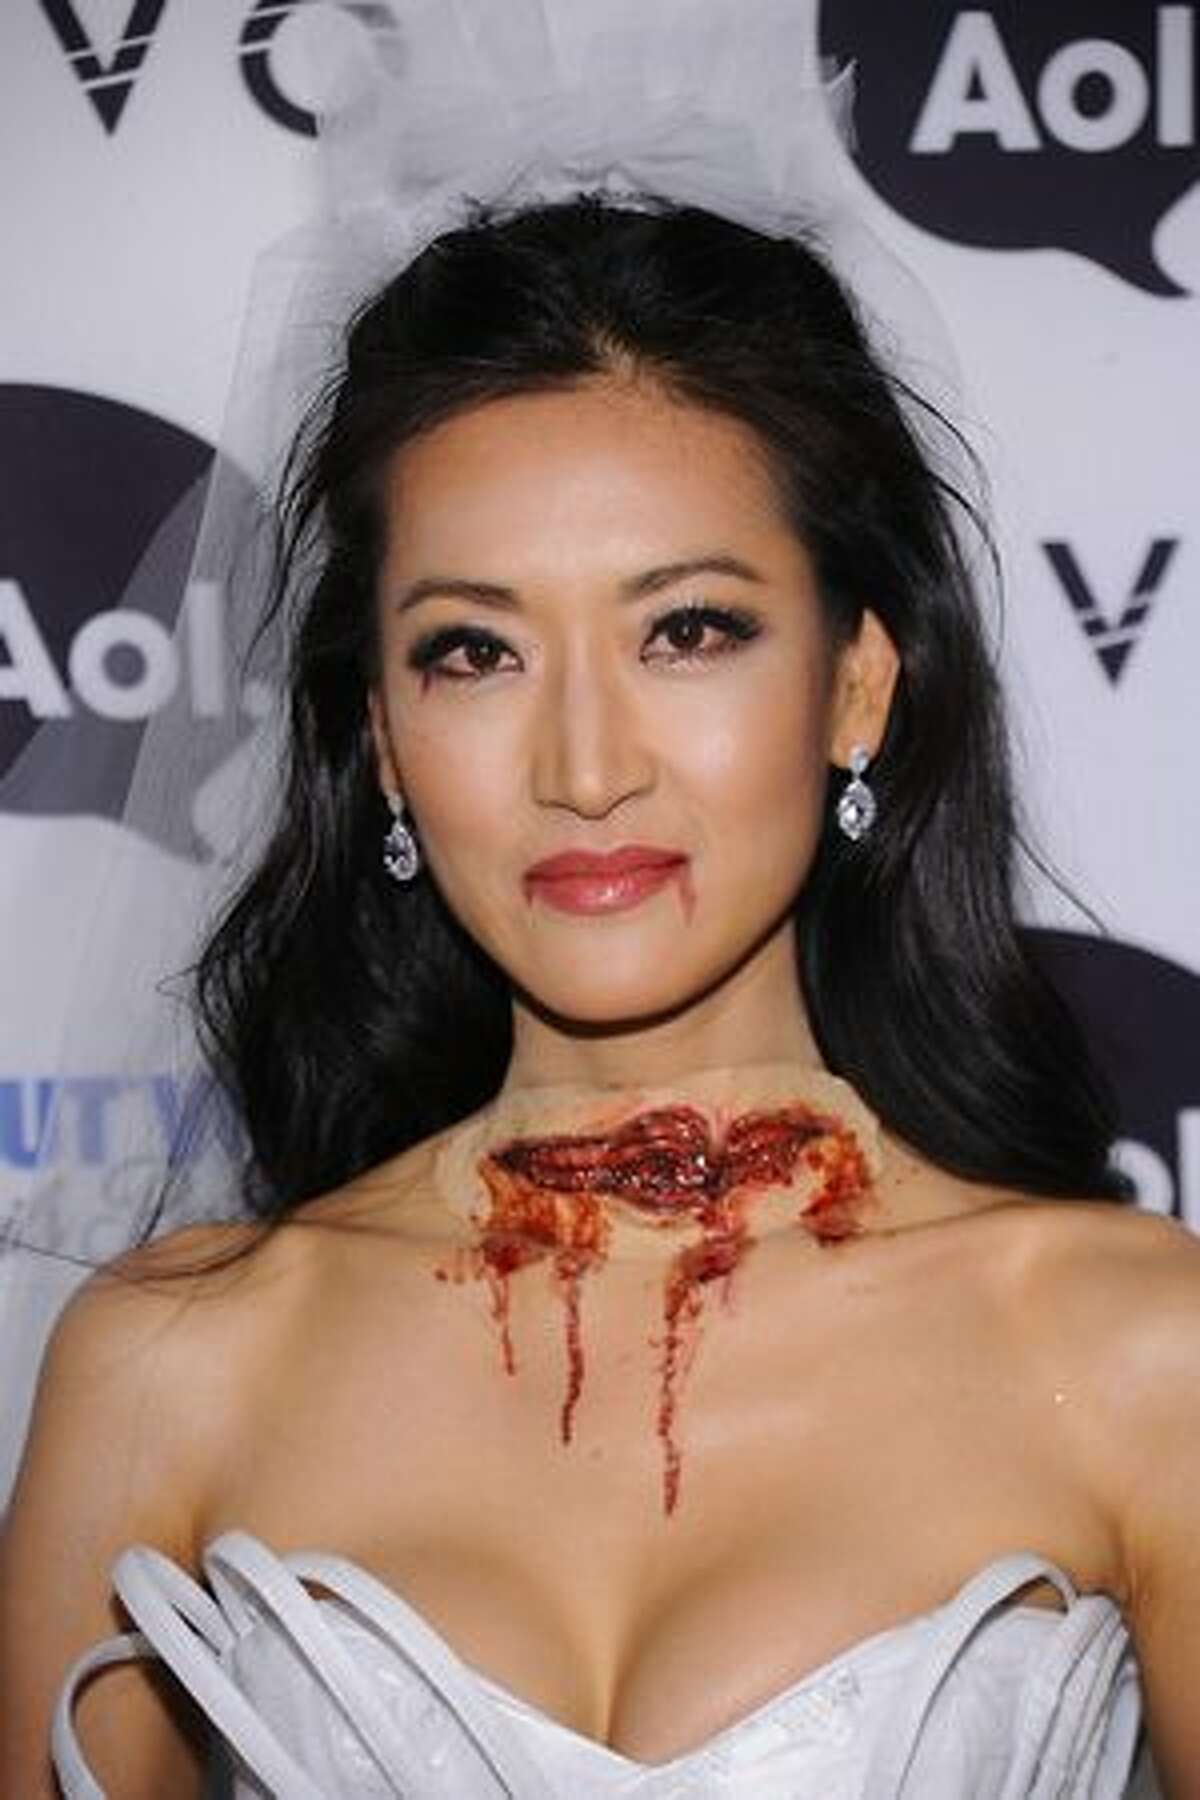 TV personality Kelly Choi attends Heidi Klum's 2010 Halloween Party at Lavo in New York City.